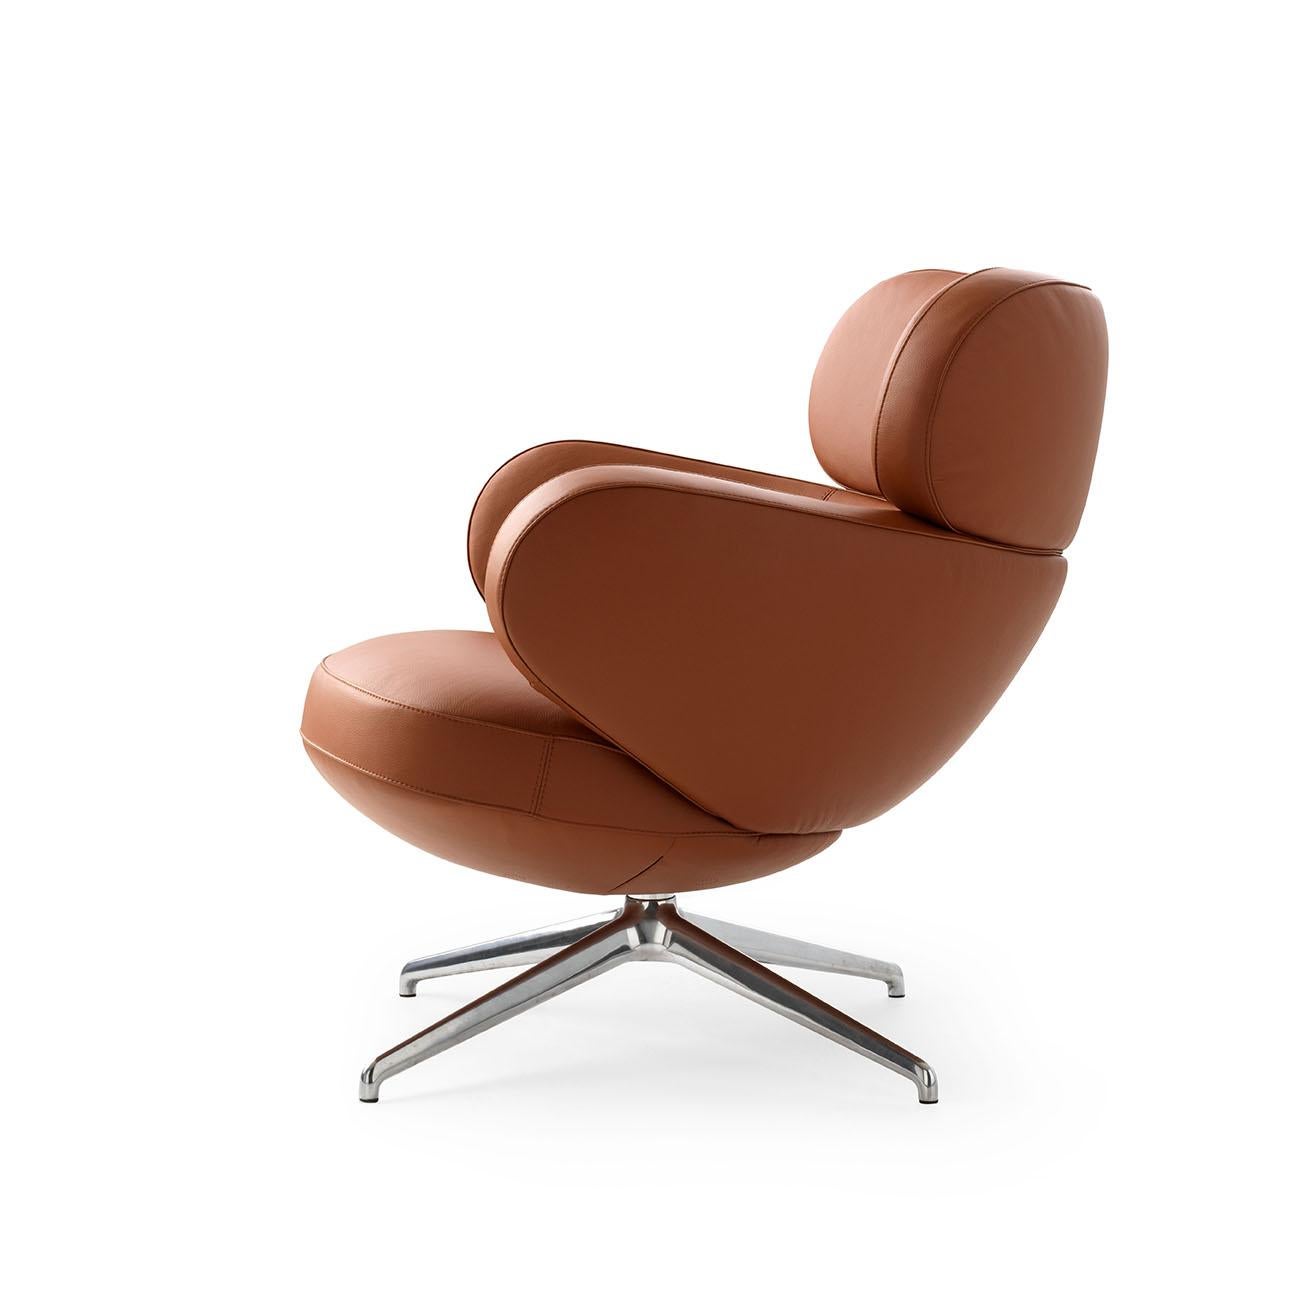 The LXR09 is one of the most charming members of the Leolux collection. It welcomes you with open arms and provides you with hours on end of comfortable seating. It is equipped with a solid swivel base with four legs, which looks good as well. The